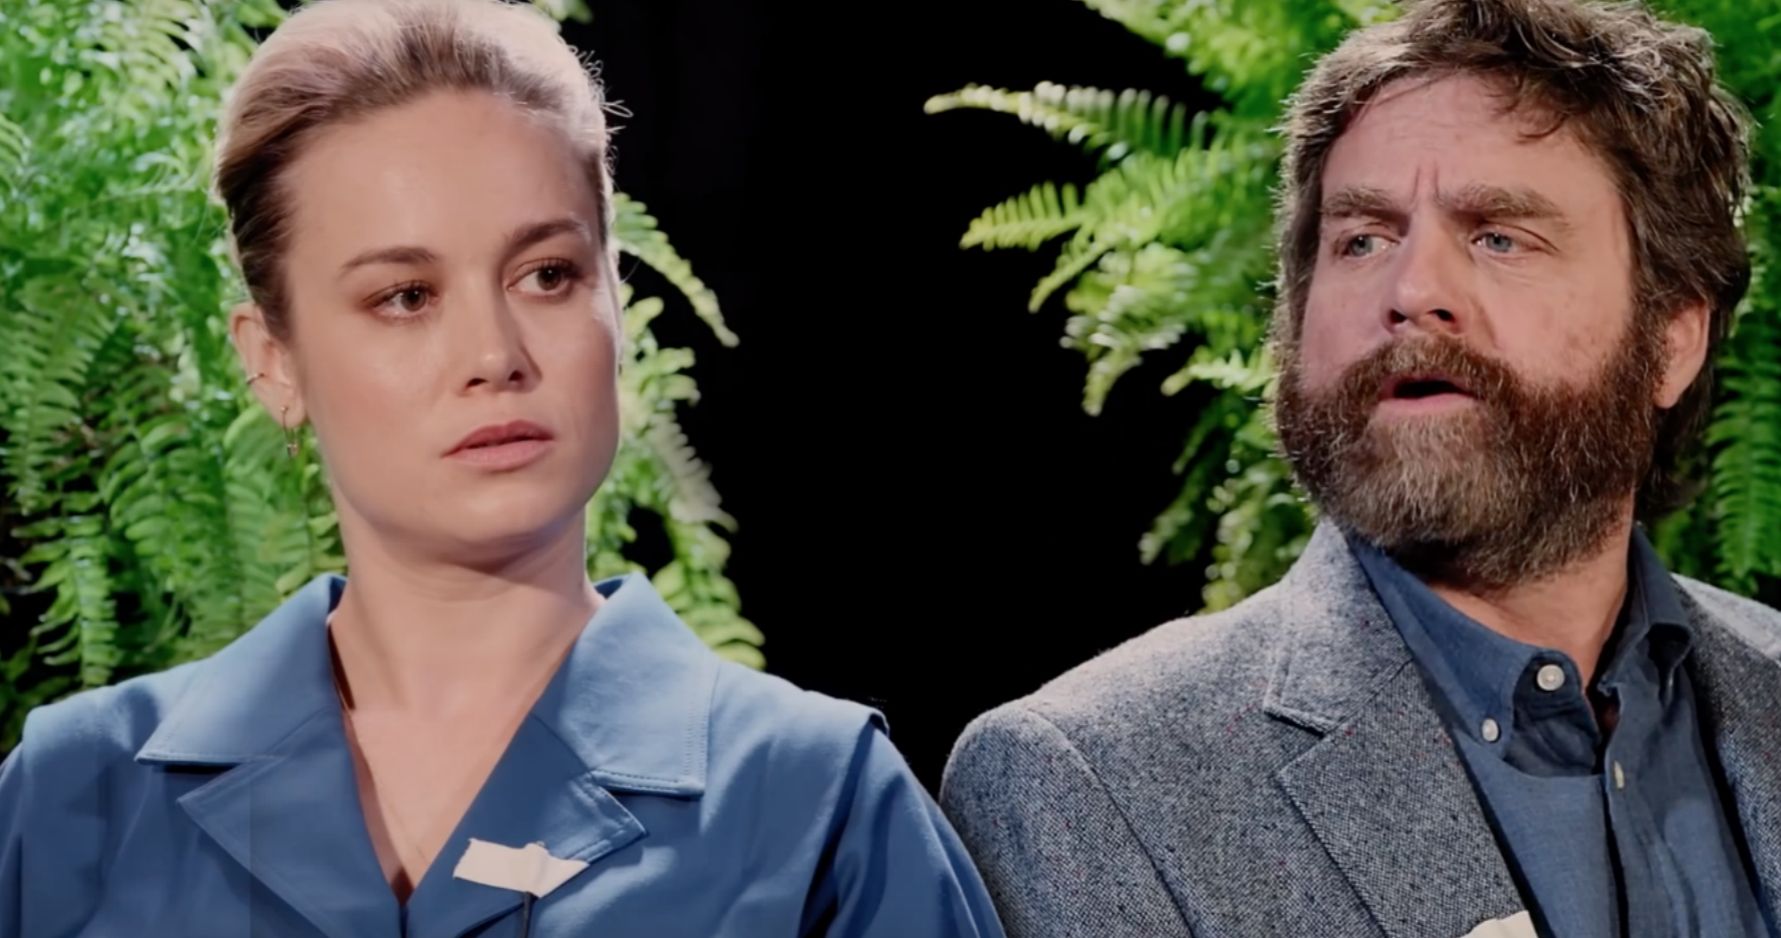 Between Two Ferns: The Movie Trailer Takes Zach Galifianakis on an All-Star Road Trip